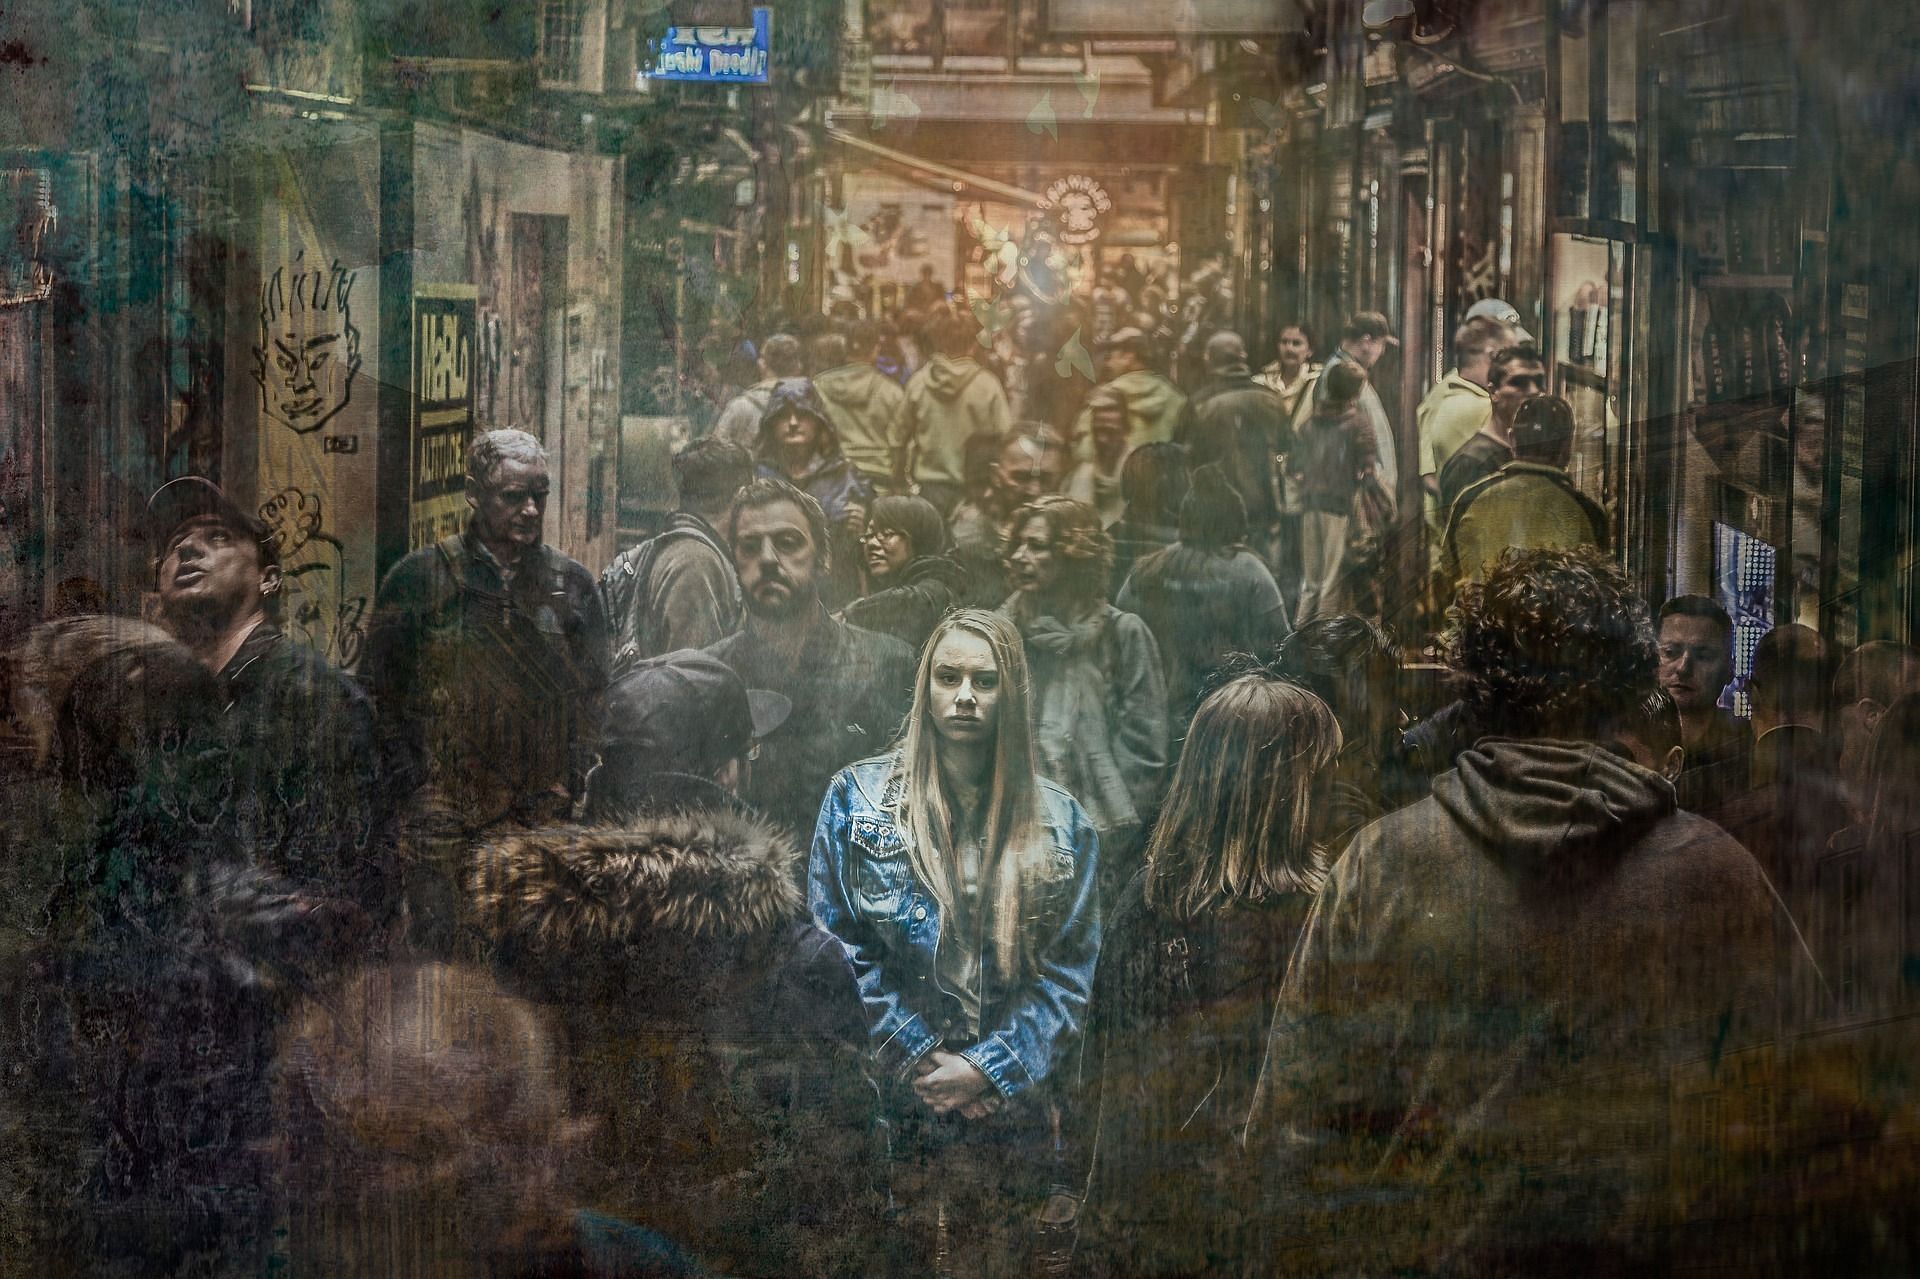 Loneliness can be experienced even in a market full of people. ( Photo via Pixaboy/ Gray Dickason)